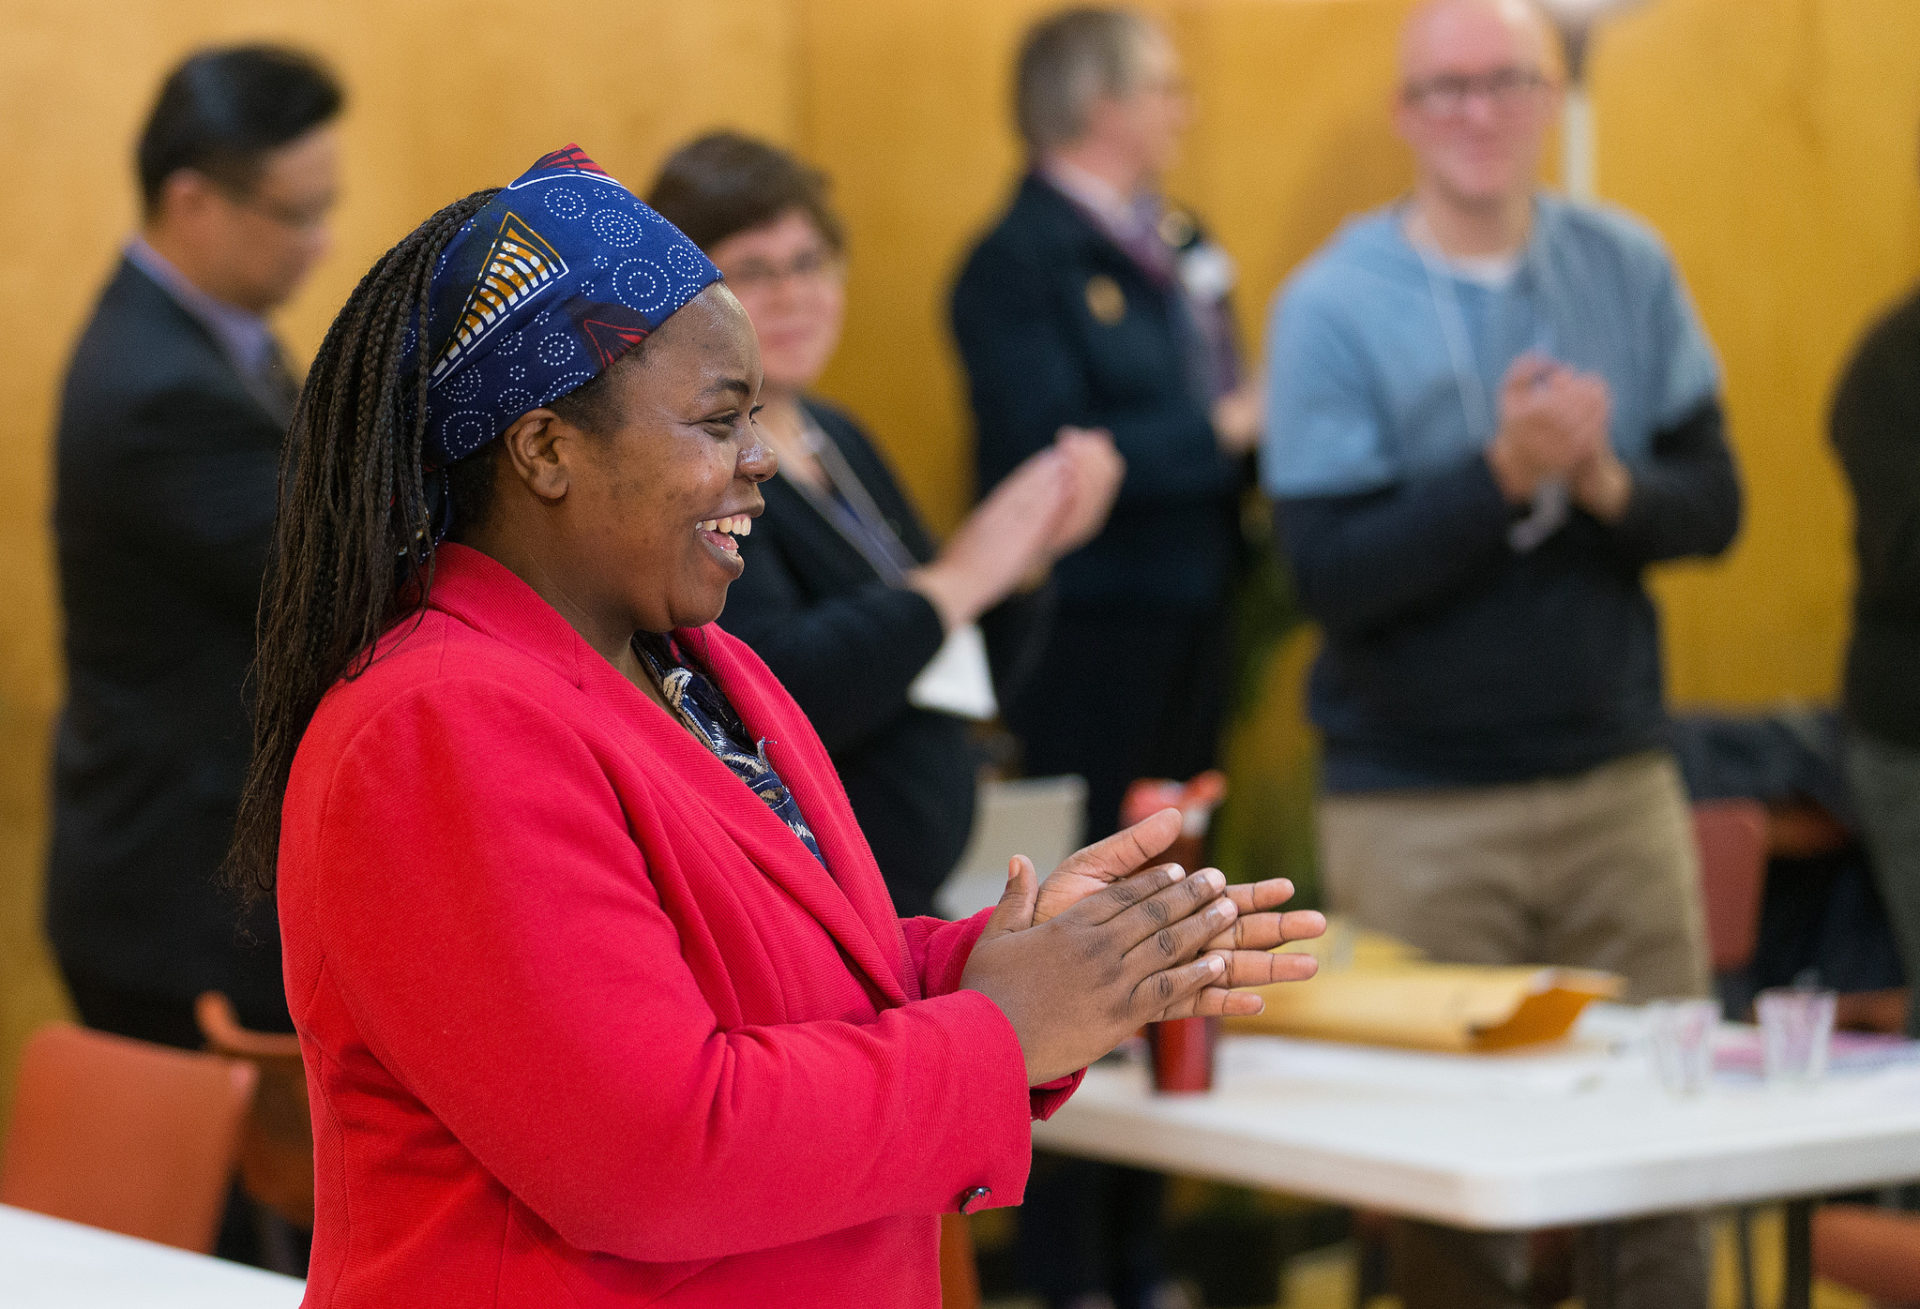 Rev. Tazvionepi Nyarota applauds a decision by Edmonton Presbytery in 2016 to support the Zimbabwe United Methodist Church of Canada as a mission of the United Church. (Photo credit: Mike DuBose/UMNS)